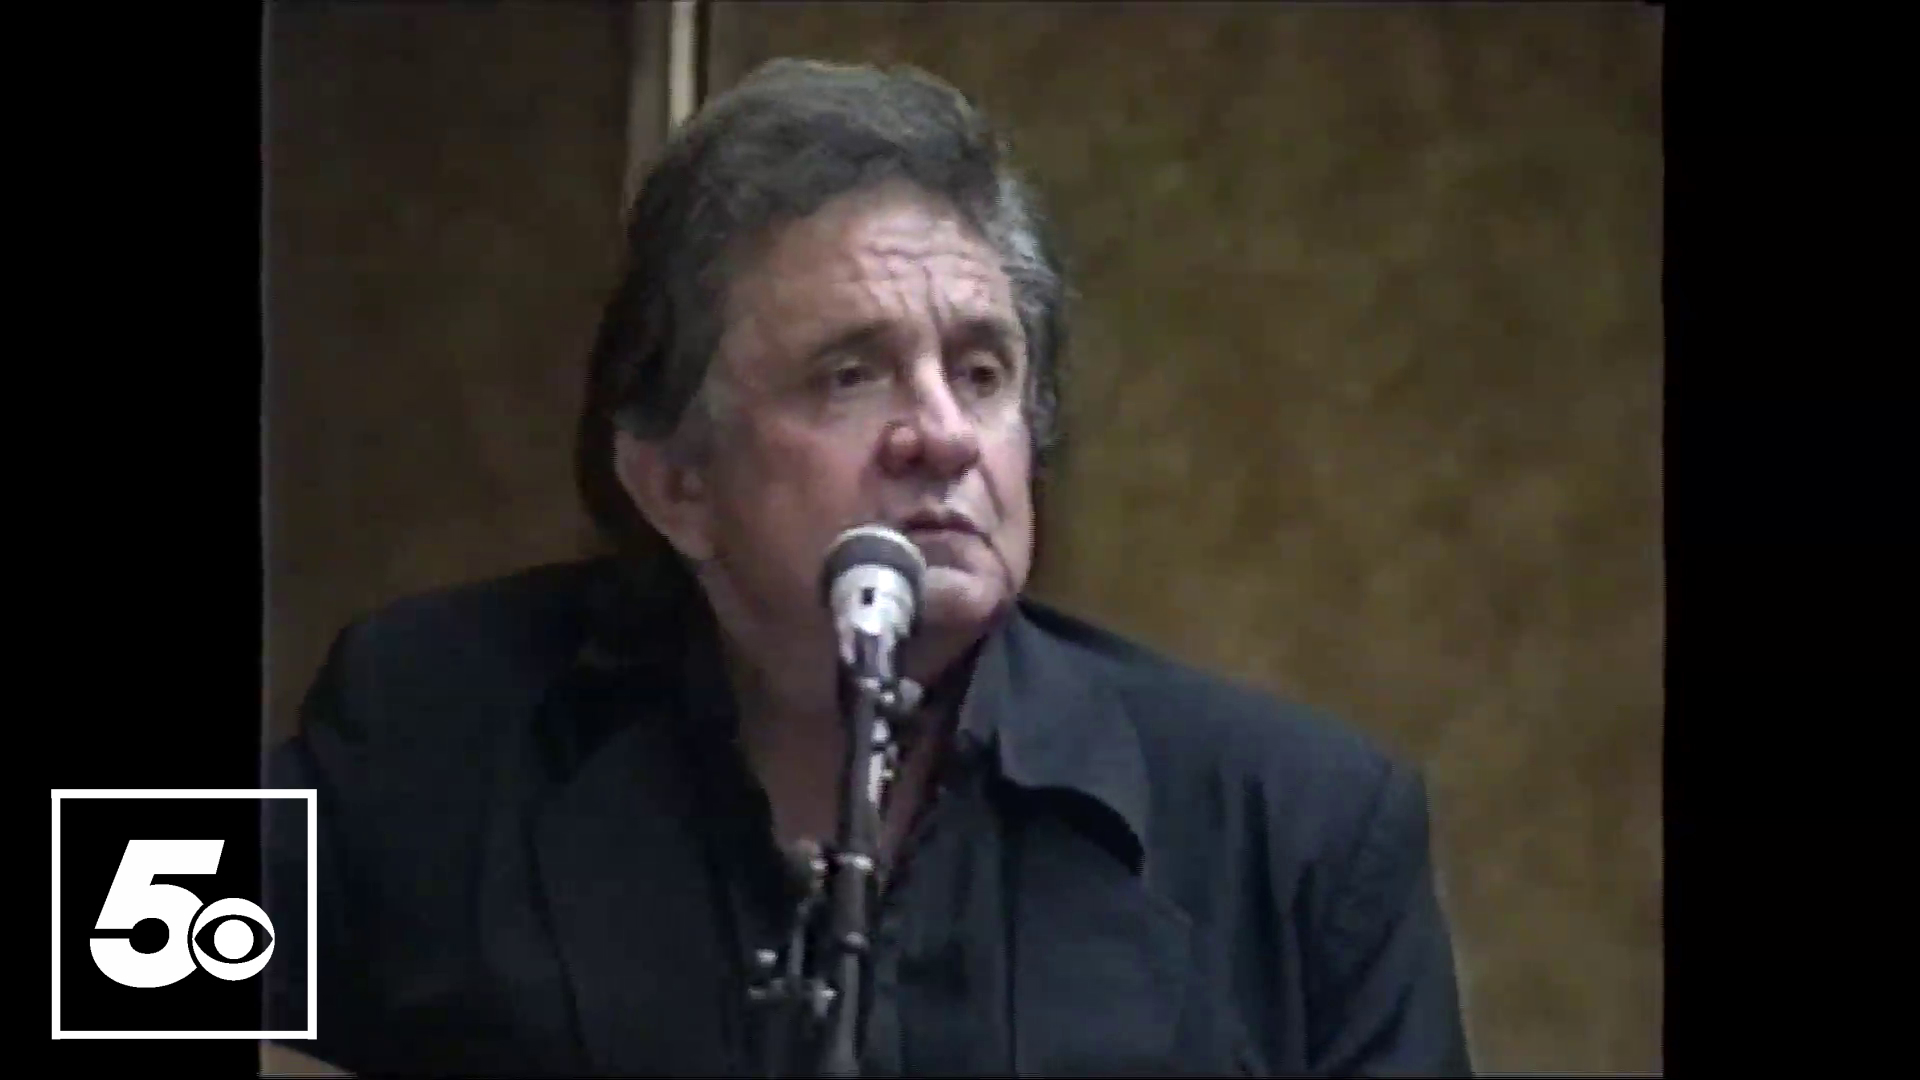 In 1989, Johnny Cash returned to his home state of Arkansas to discuss overcoming addiction with a group of drug counselors.